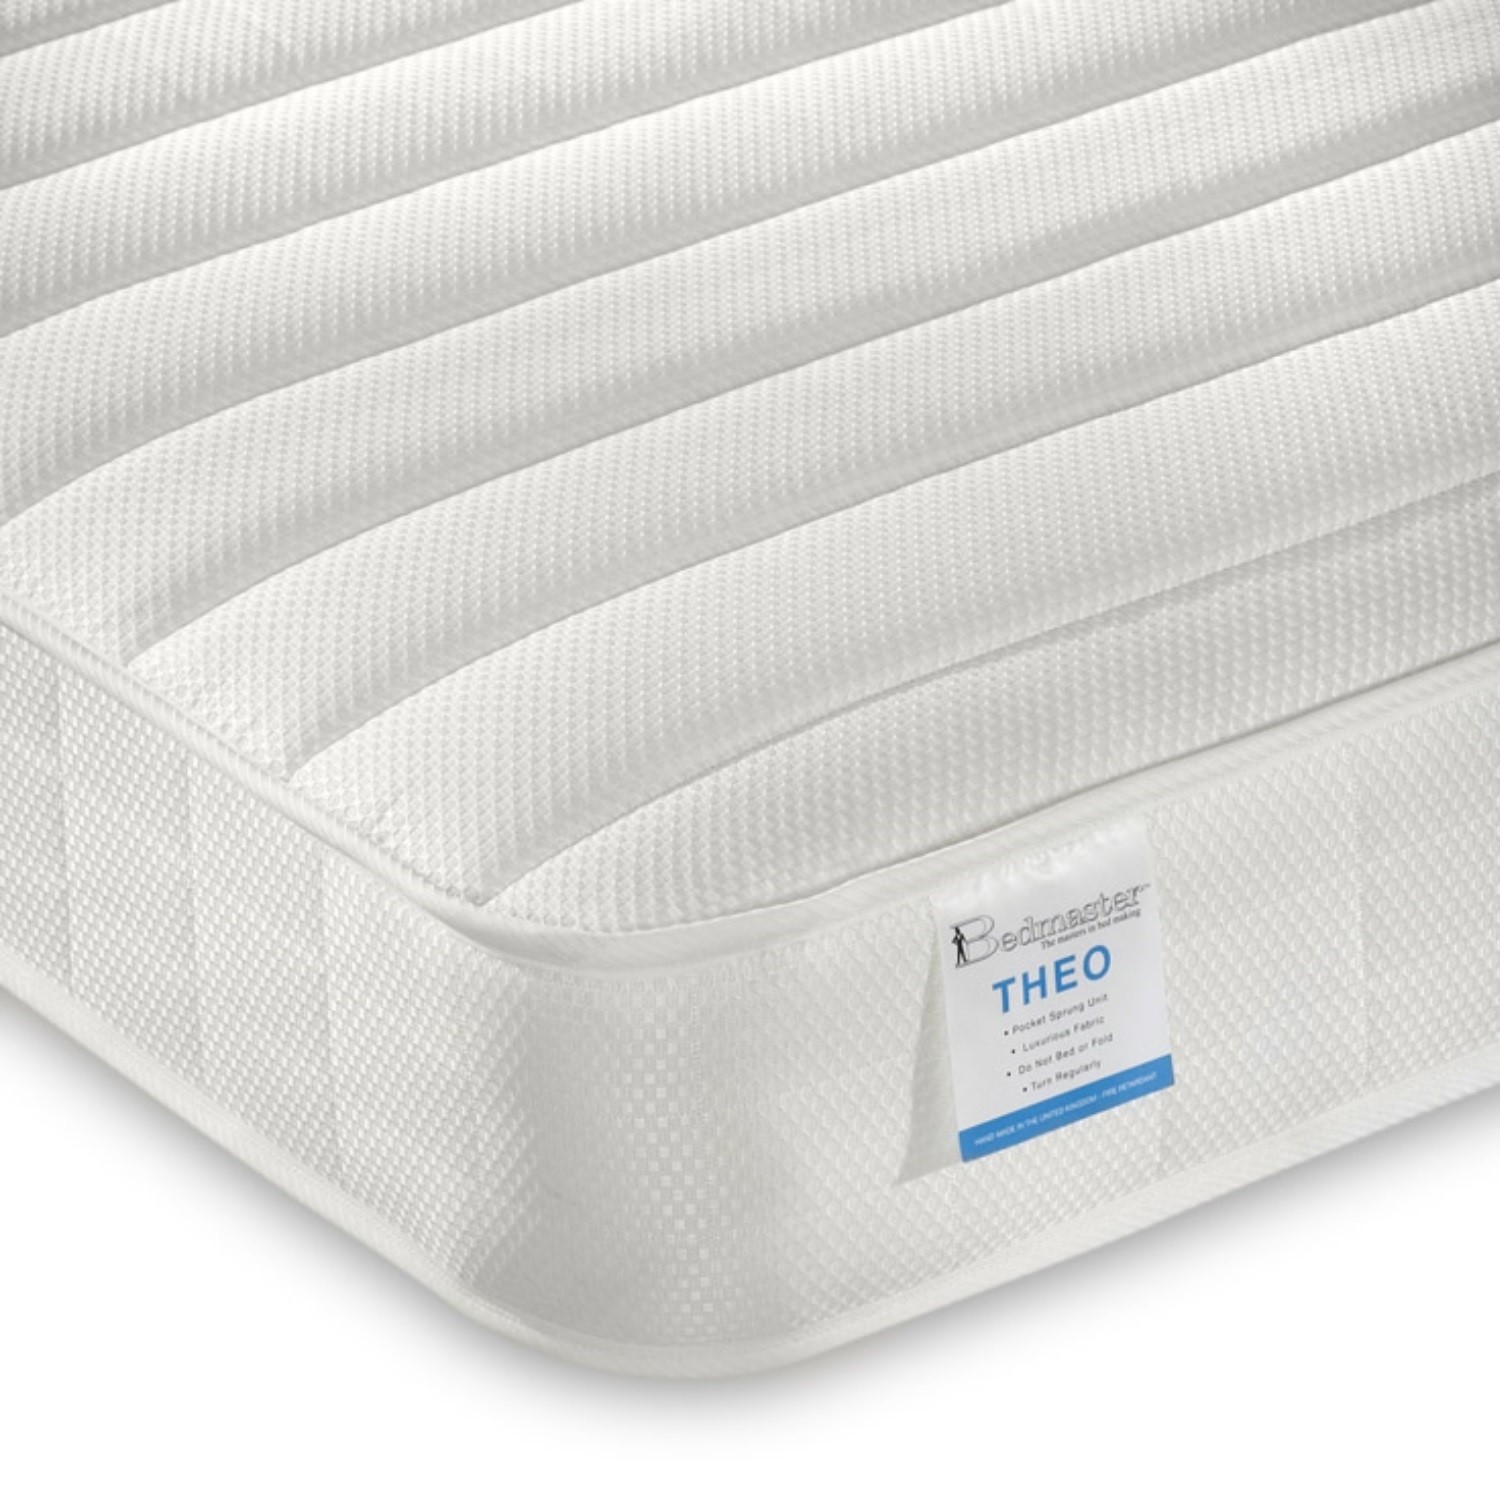 Theo Pocket Sprung Quilted Mattress - Single THEO2 5056096021110.0